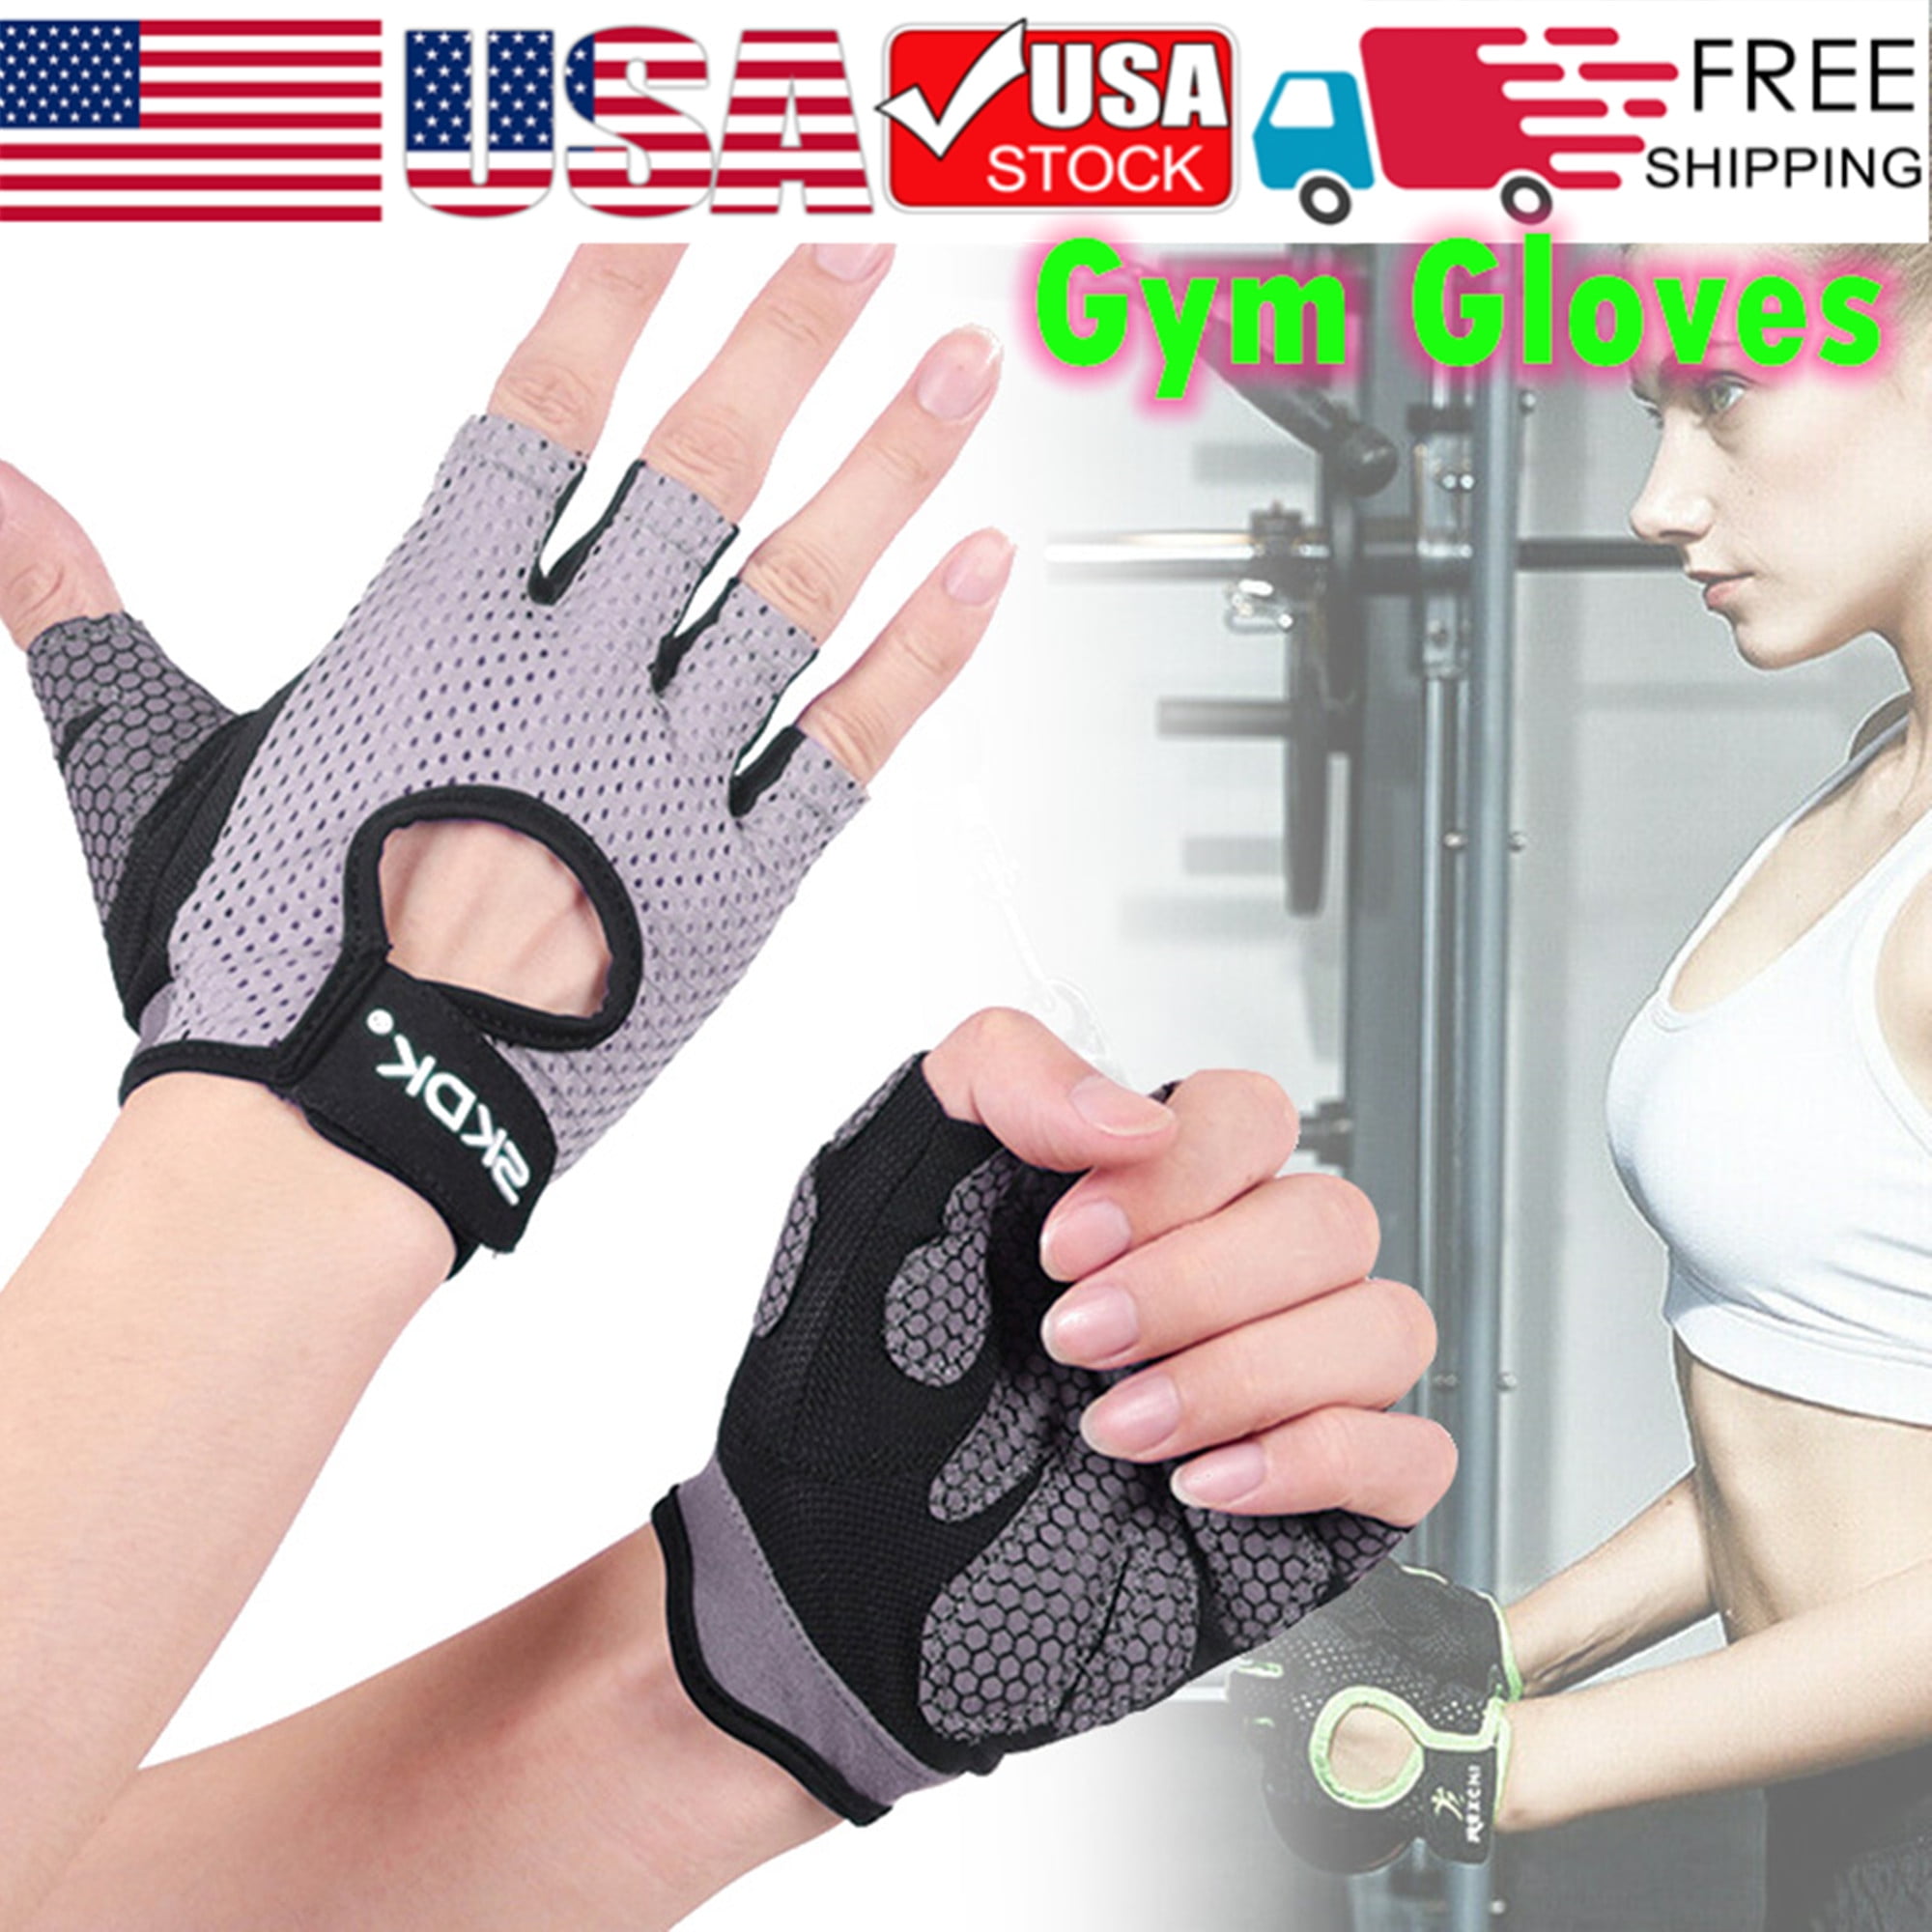 Details about   Bodybuilding Dumbbell Fitness Barbell Weightlifting Gym Gloves Adults Breathable